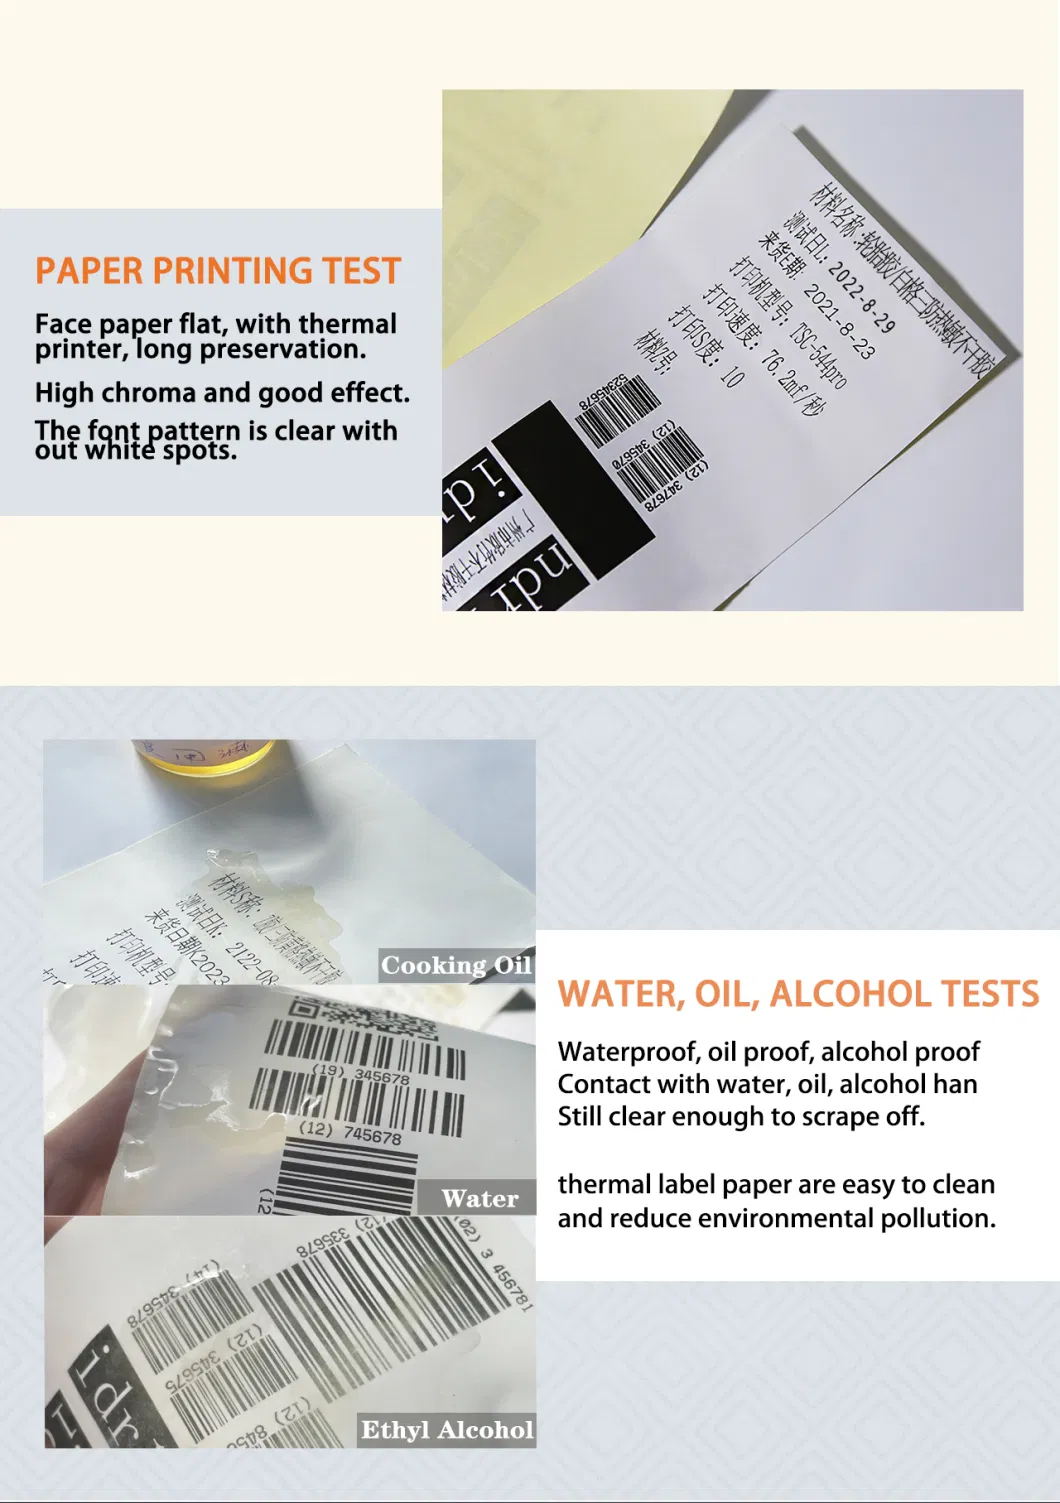 Jumbo Roll Raw Material Tyre Glue Top Direct Thermal Self-Adhesive Label Sticker